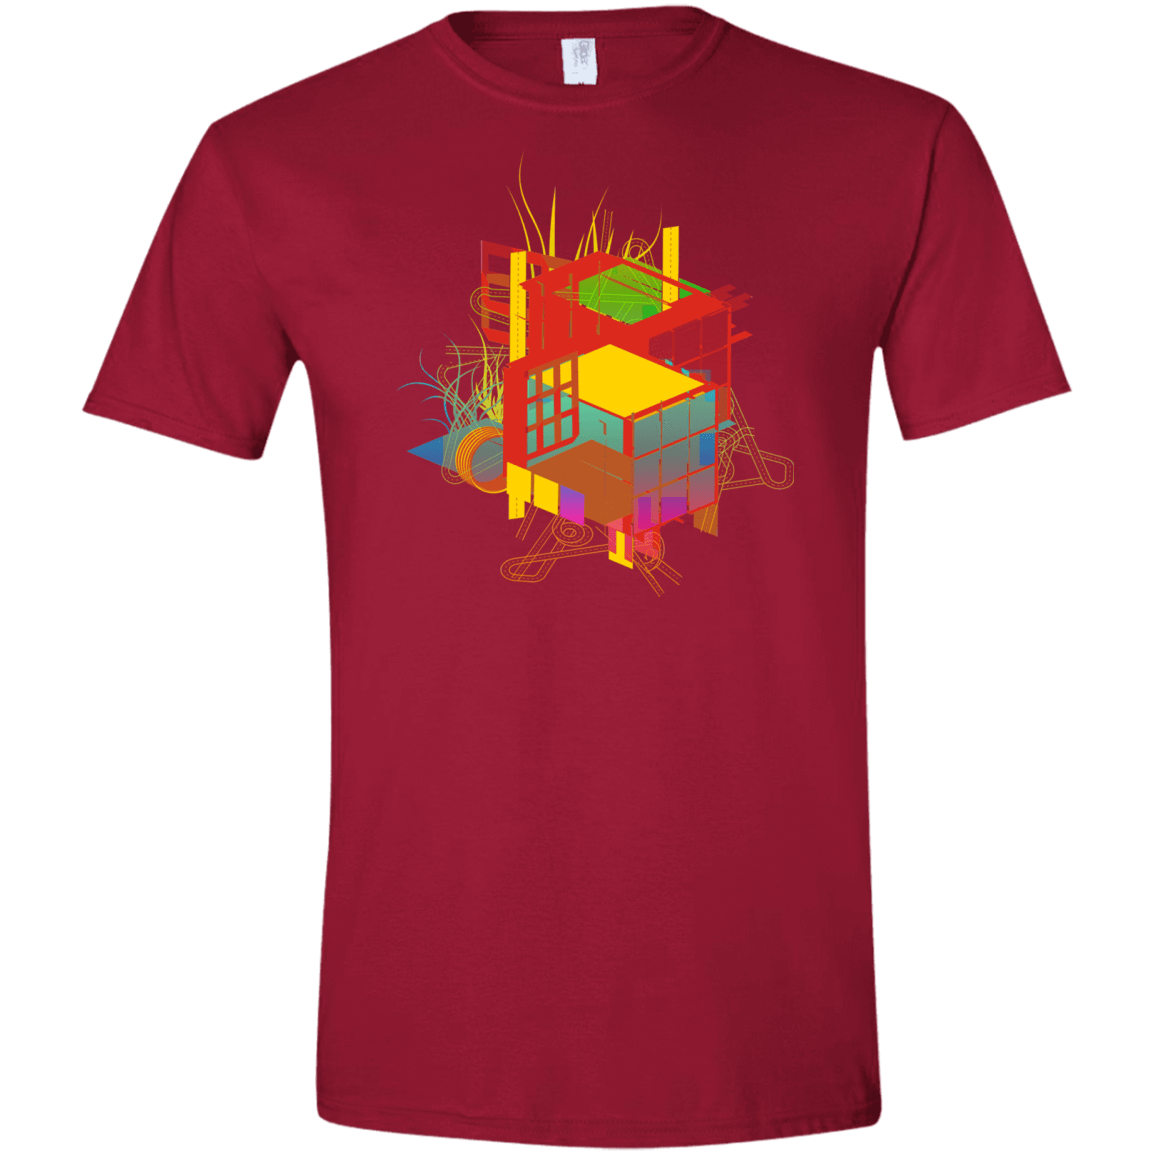 T-Shirts Cardinal Red / S Rubik's Building Men's Semi-Fitted Softstyle